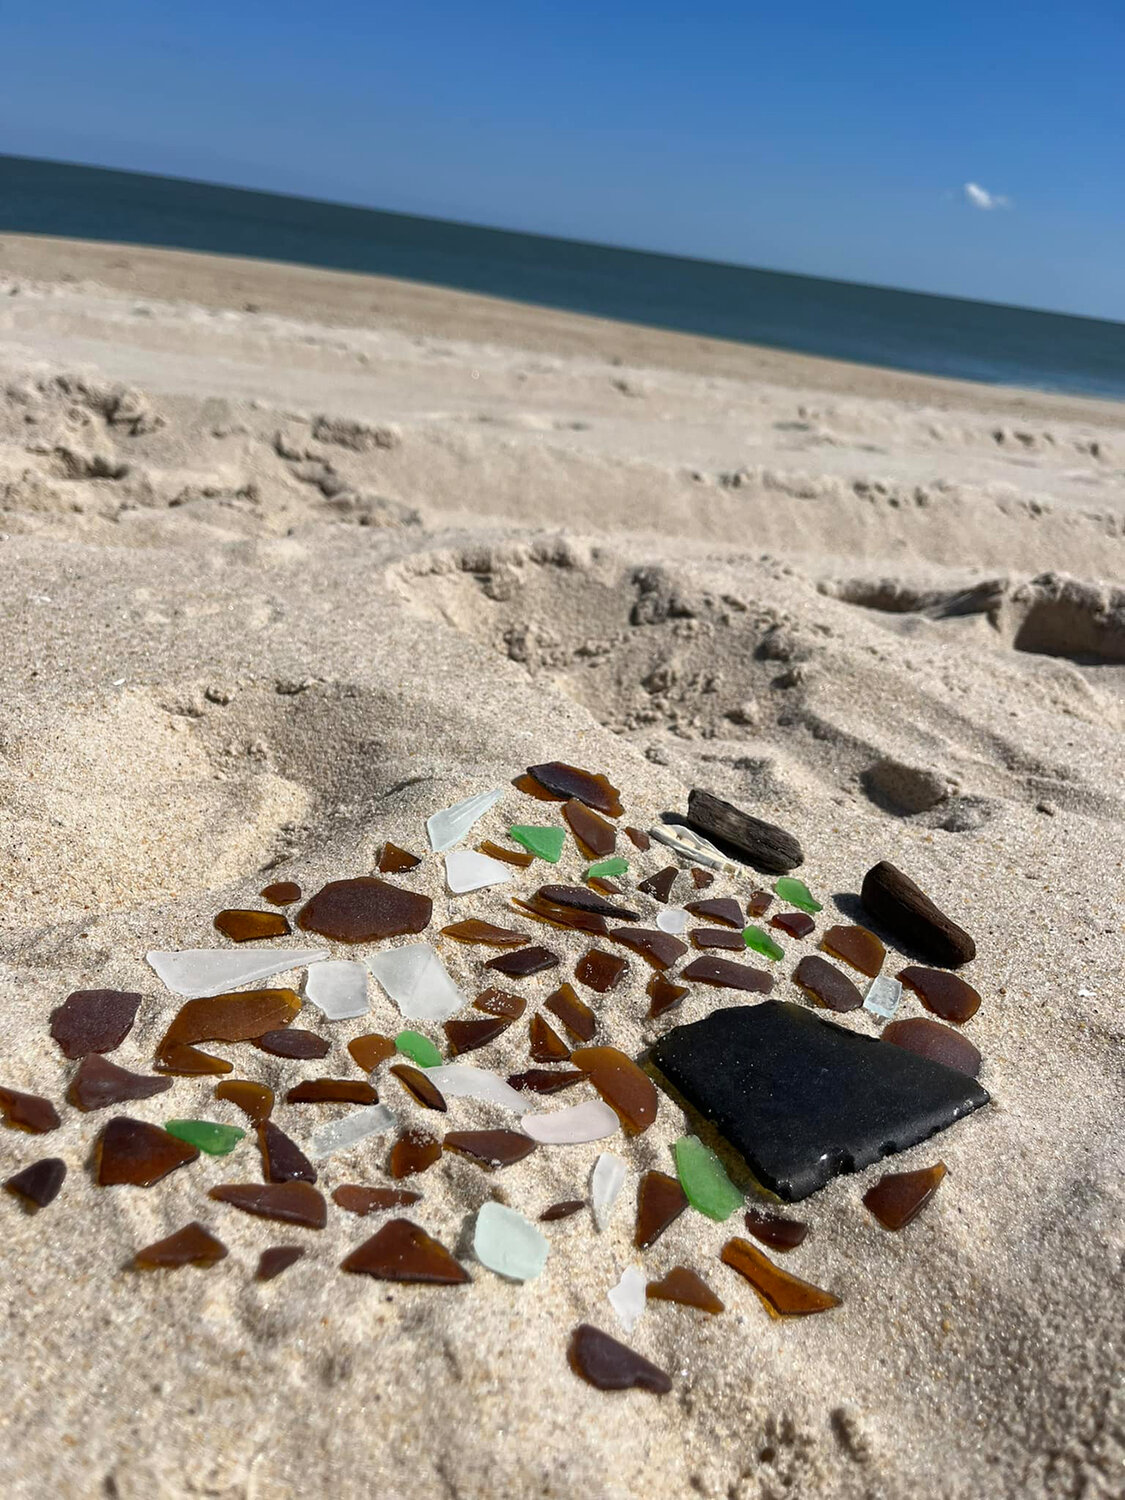 Dianne Hendrickson found this sea glass in a couple hours on a Delaware beach.